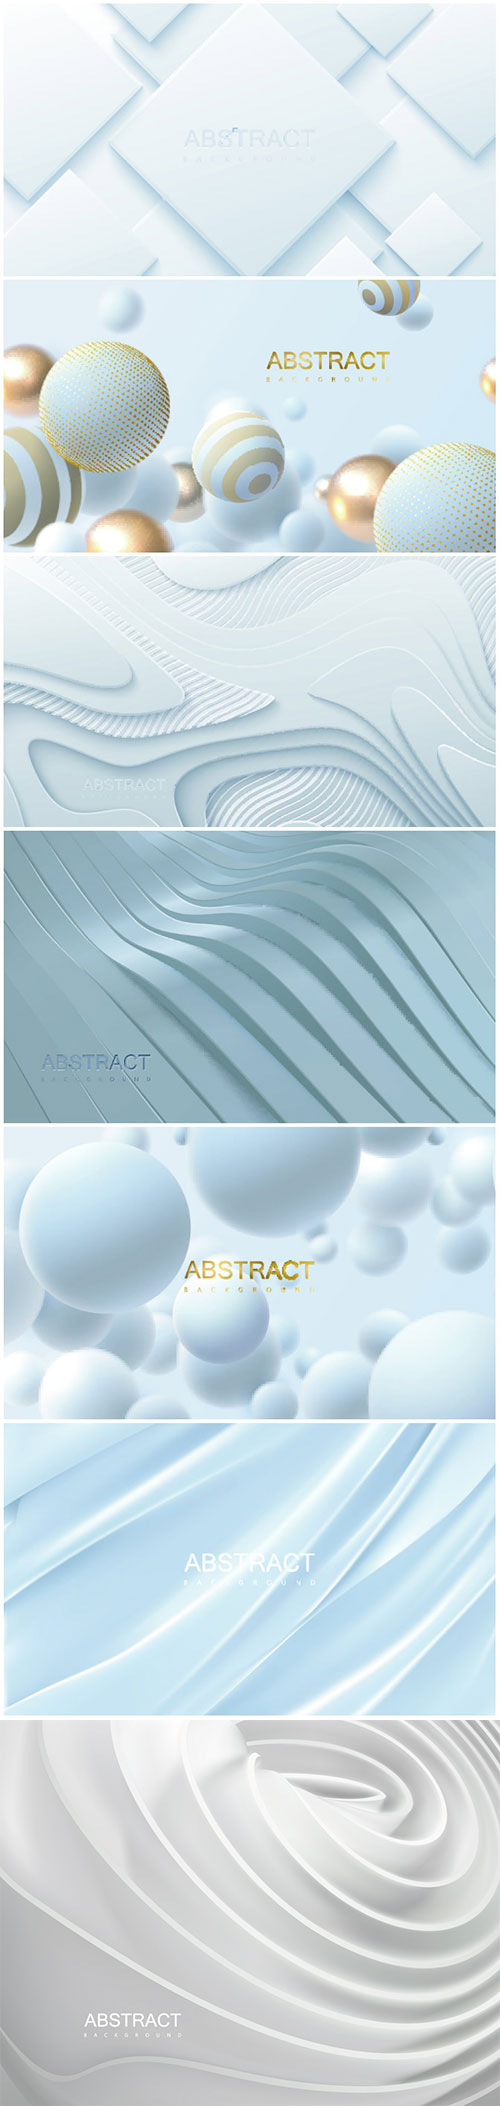 Realistic 3d vector background